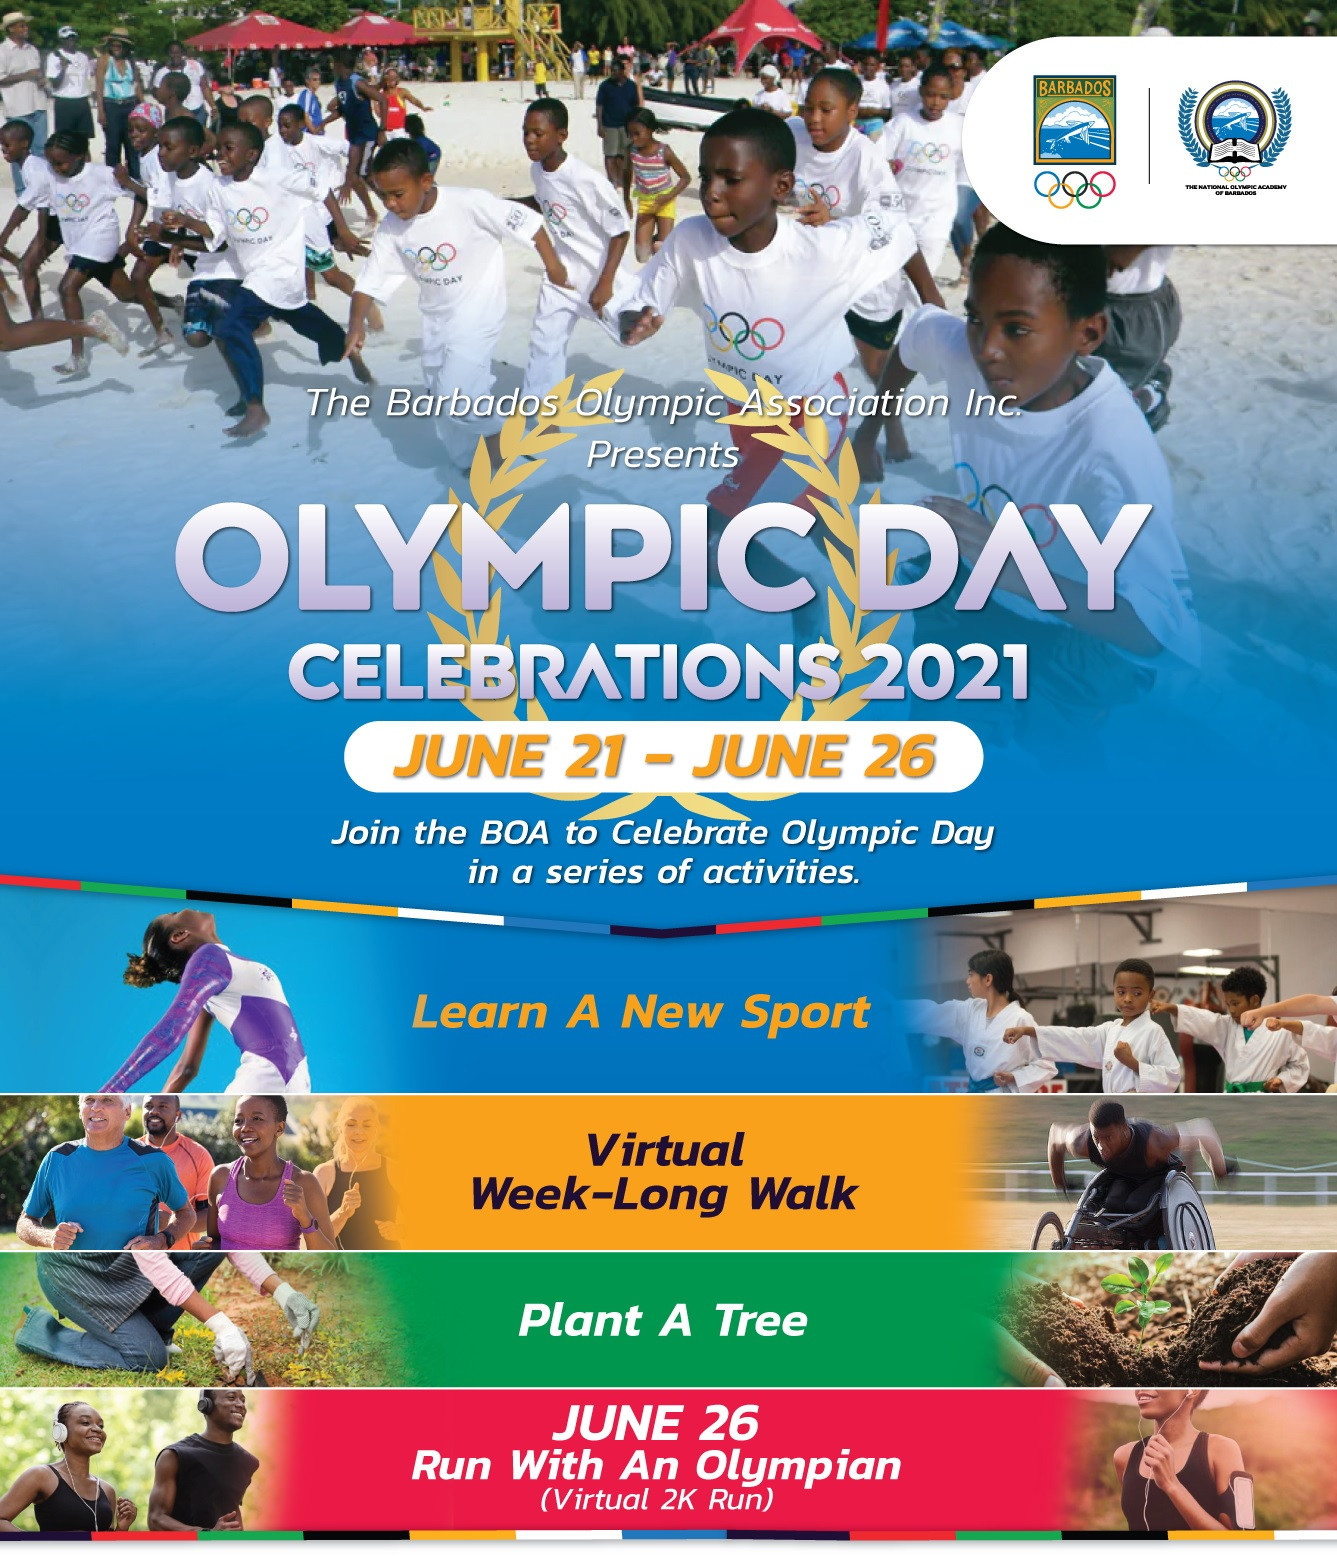 Barbados Olympic Association announces details of week of activities as part of Olympic Day celebrations